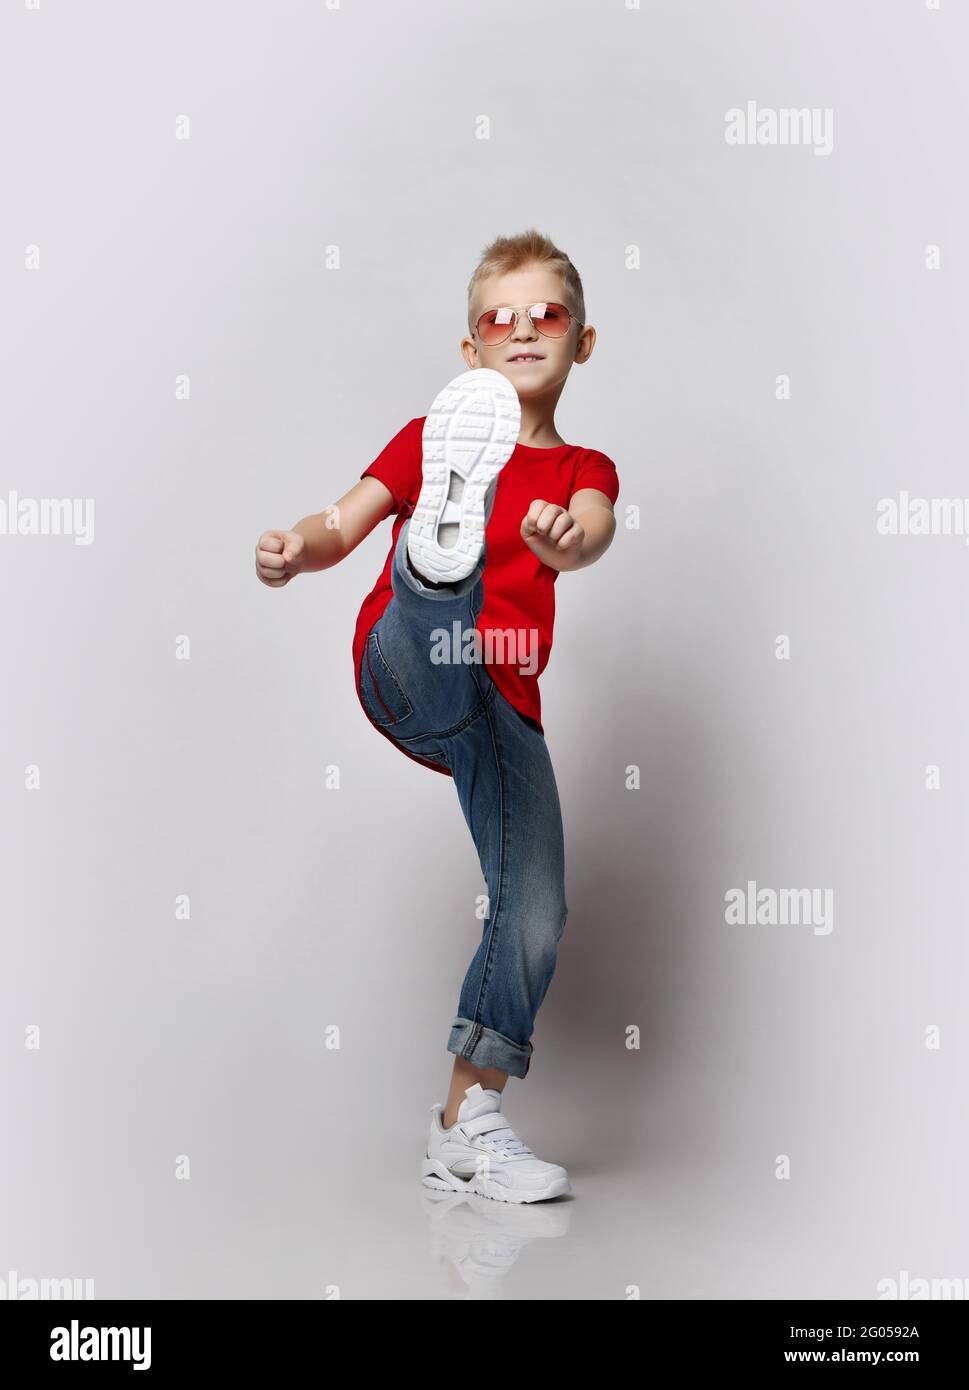 Stylish cheerful boy child in red t-shirt, jeans and sunglasses making kick with leg looking at camera Stock Photo